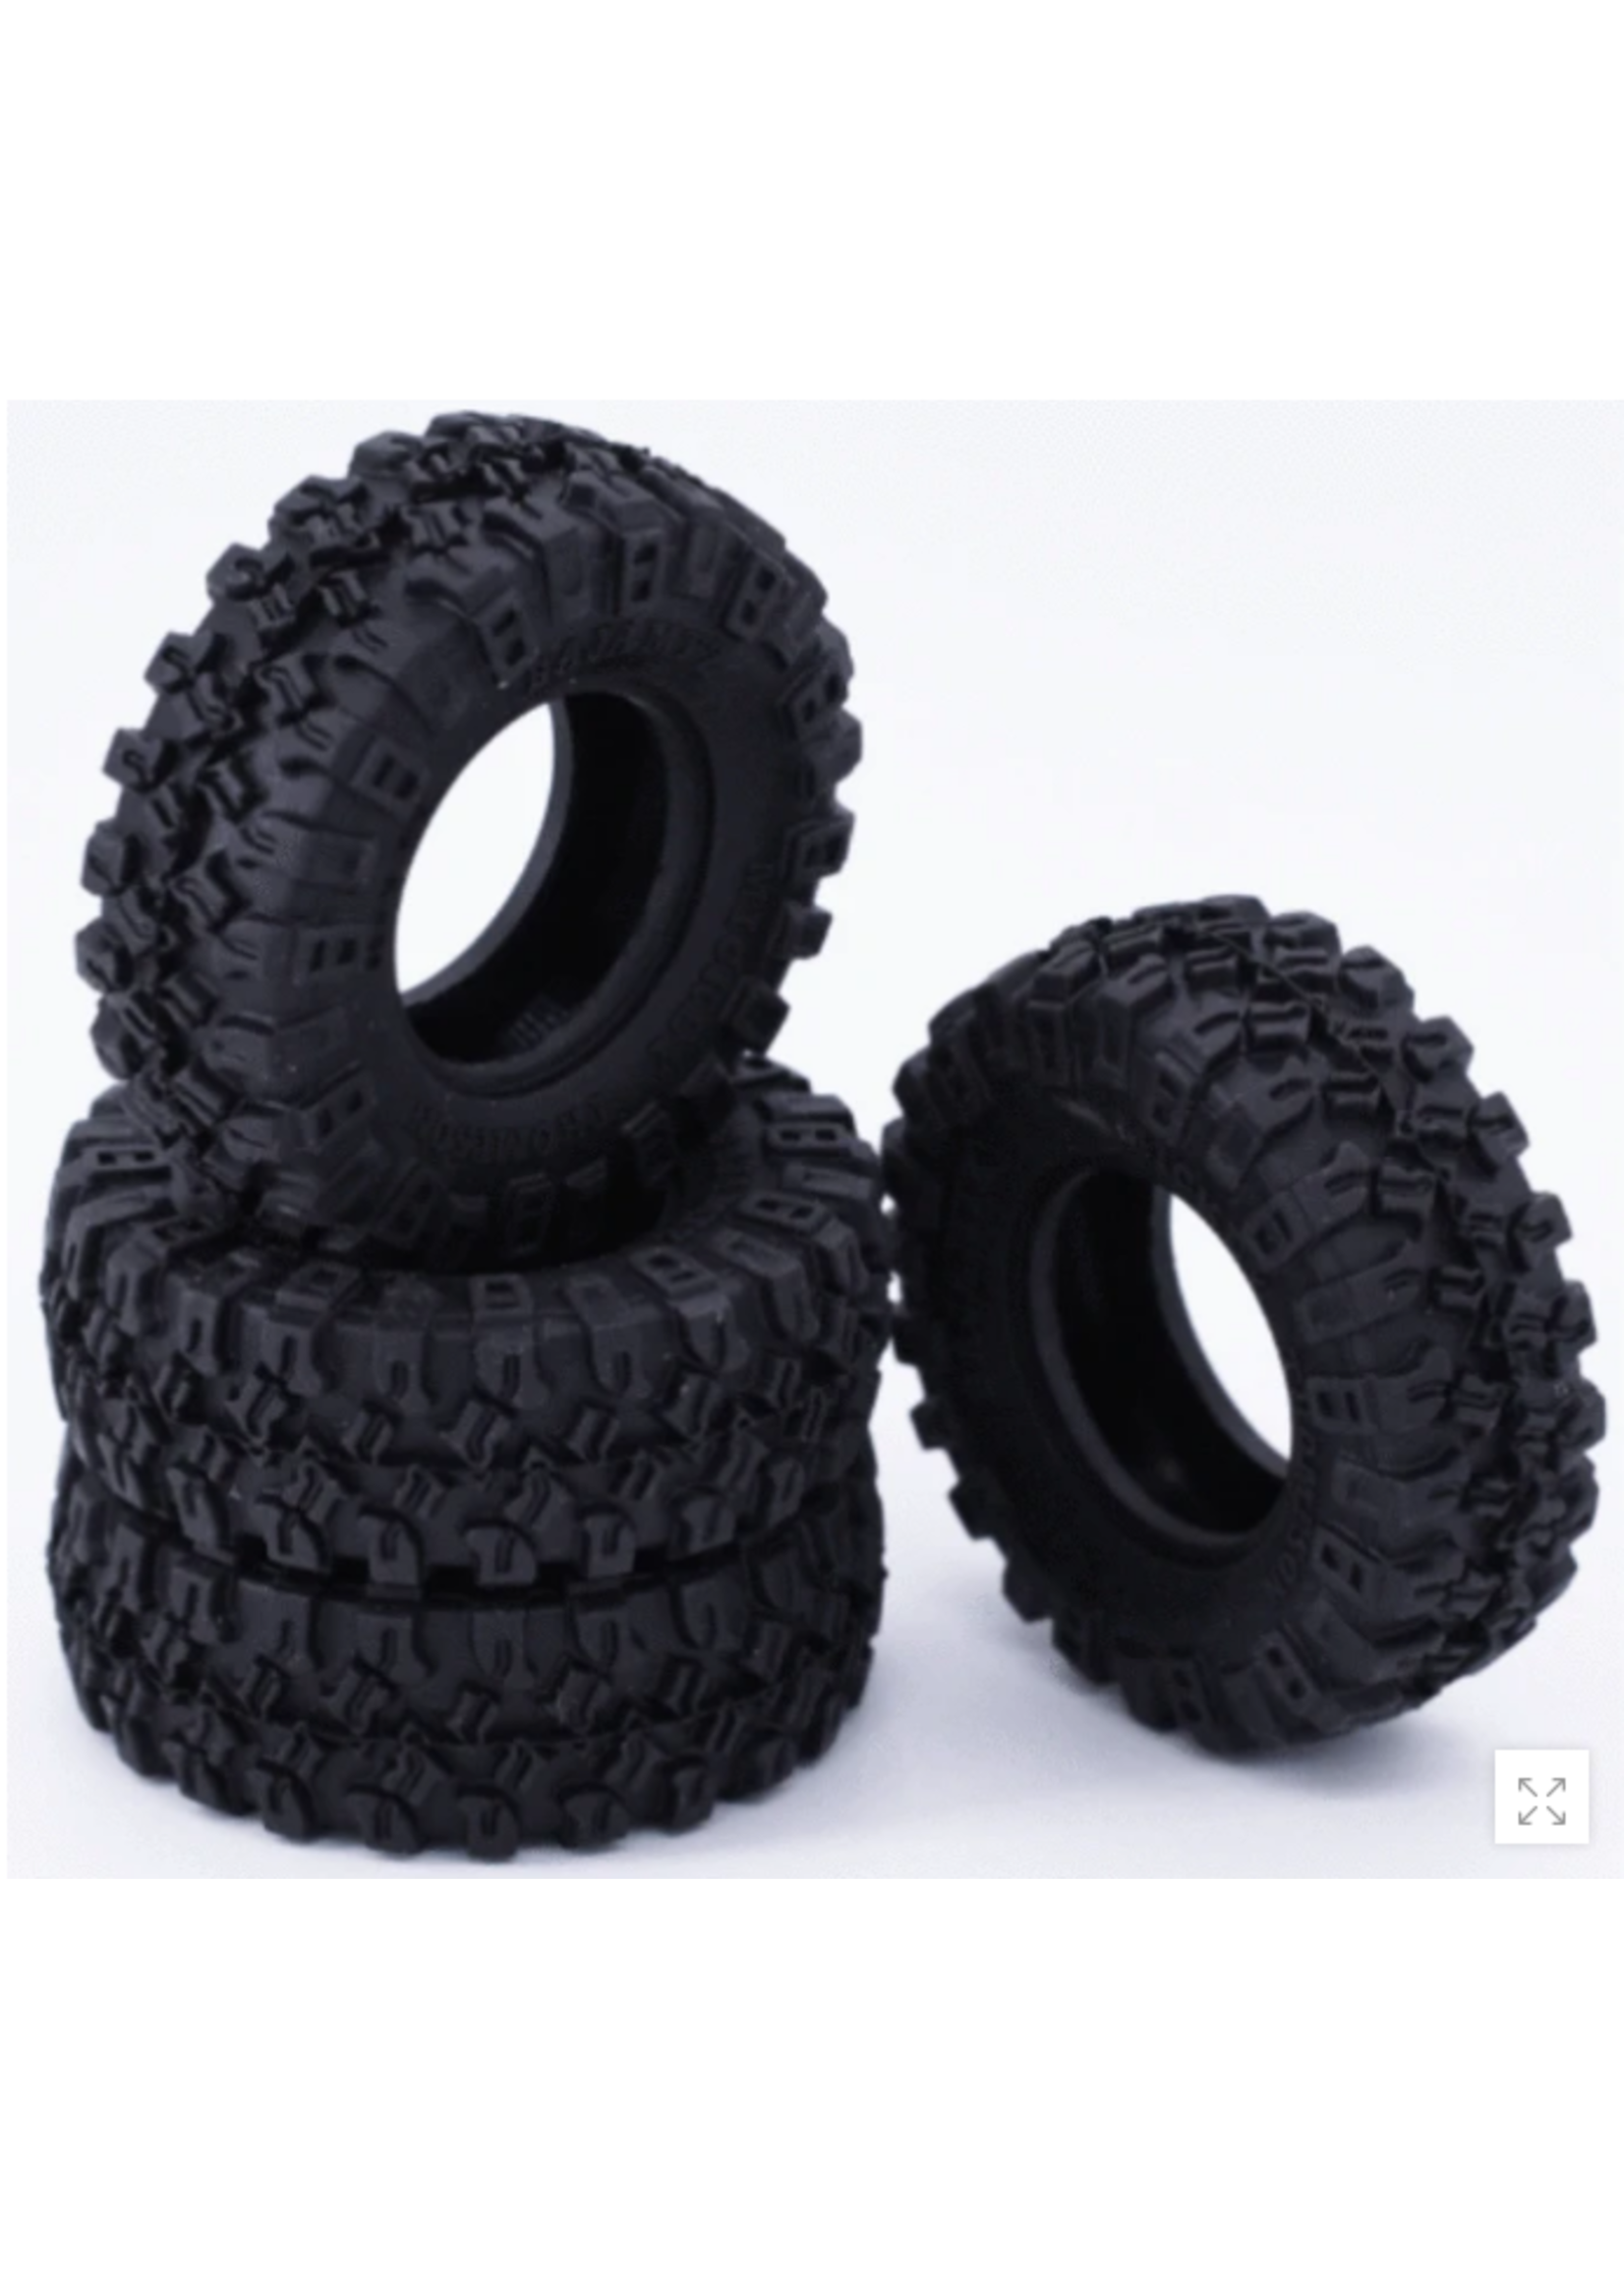 Hobby Details DTSCX24-49 A STYLE 1.0 Micro Tires with Foam 4pc Set